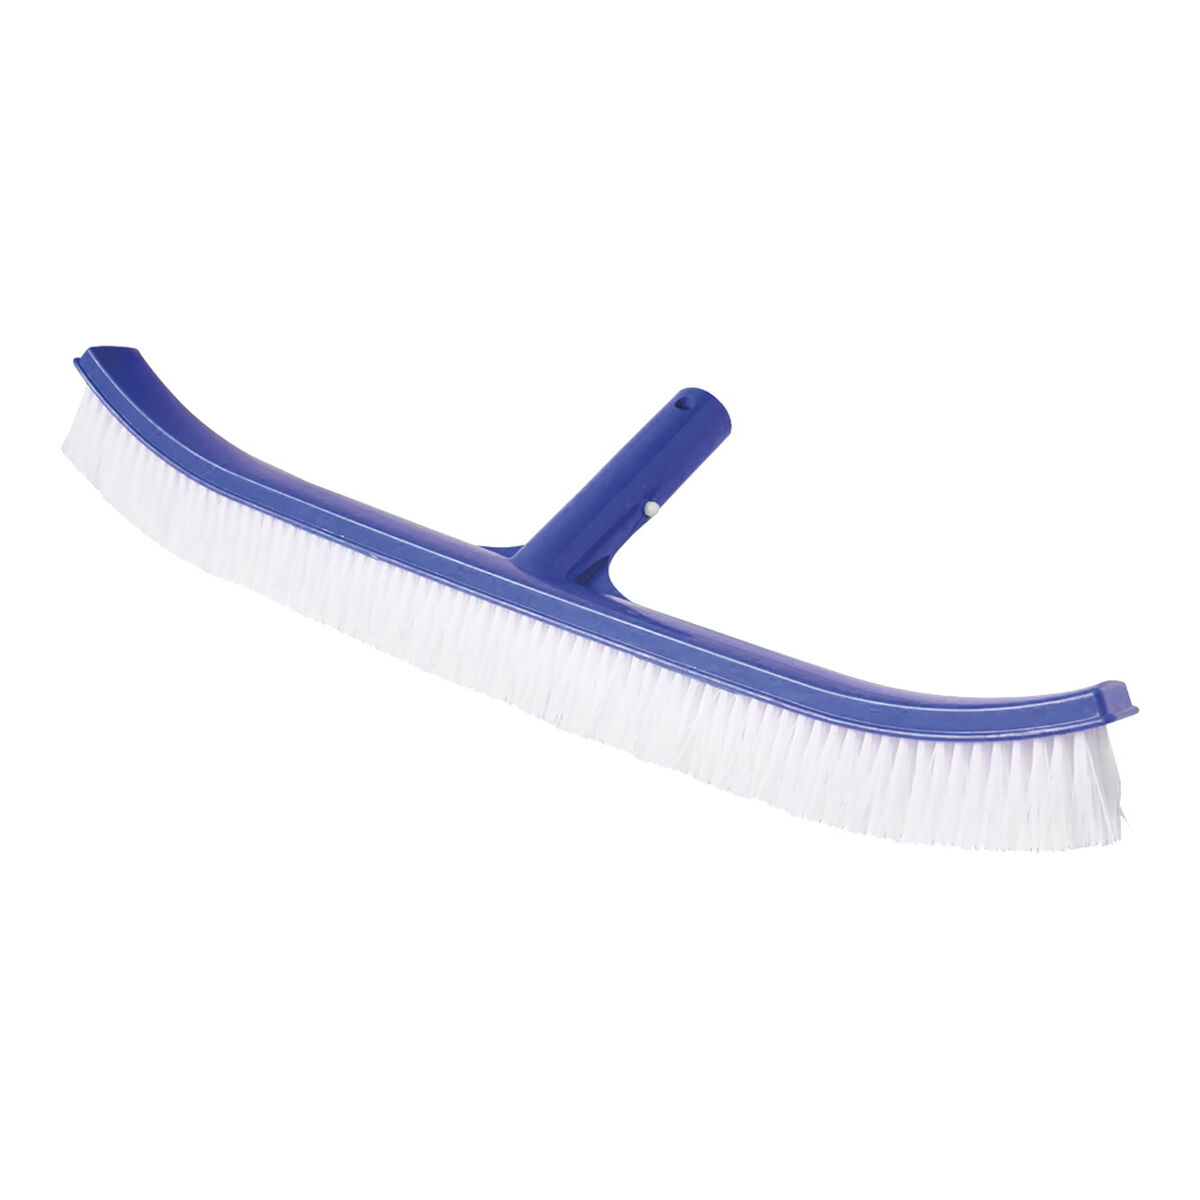 Curved Brush for Swimming Pool EDM Classic (45,5 x 14,5 cm)